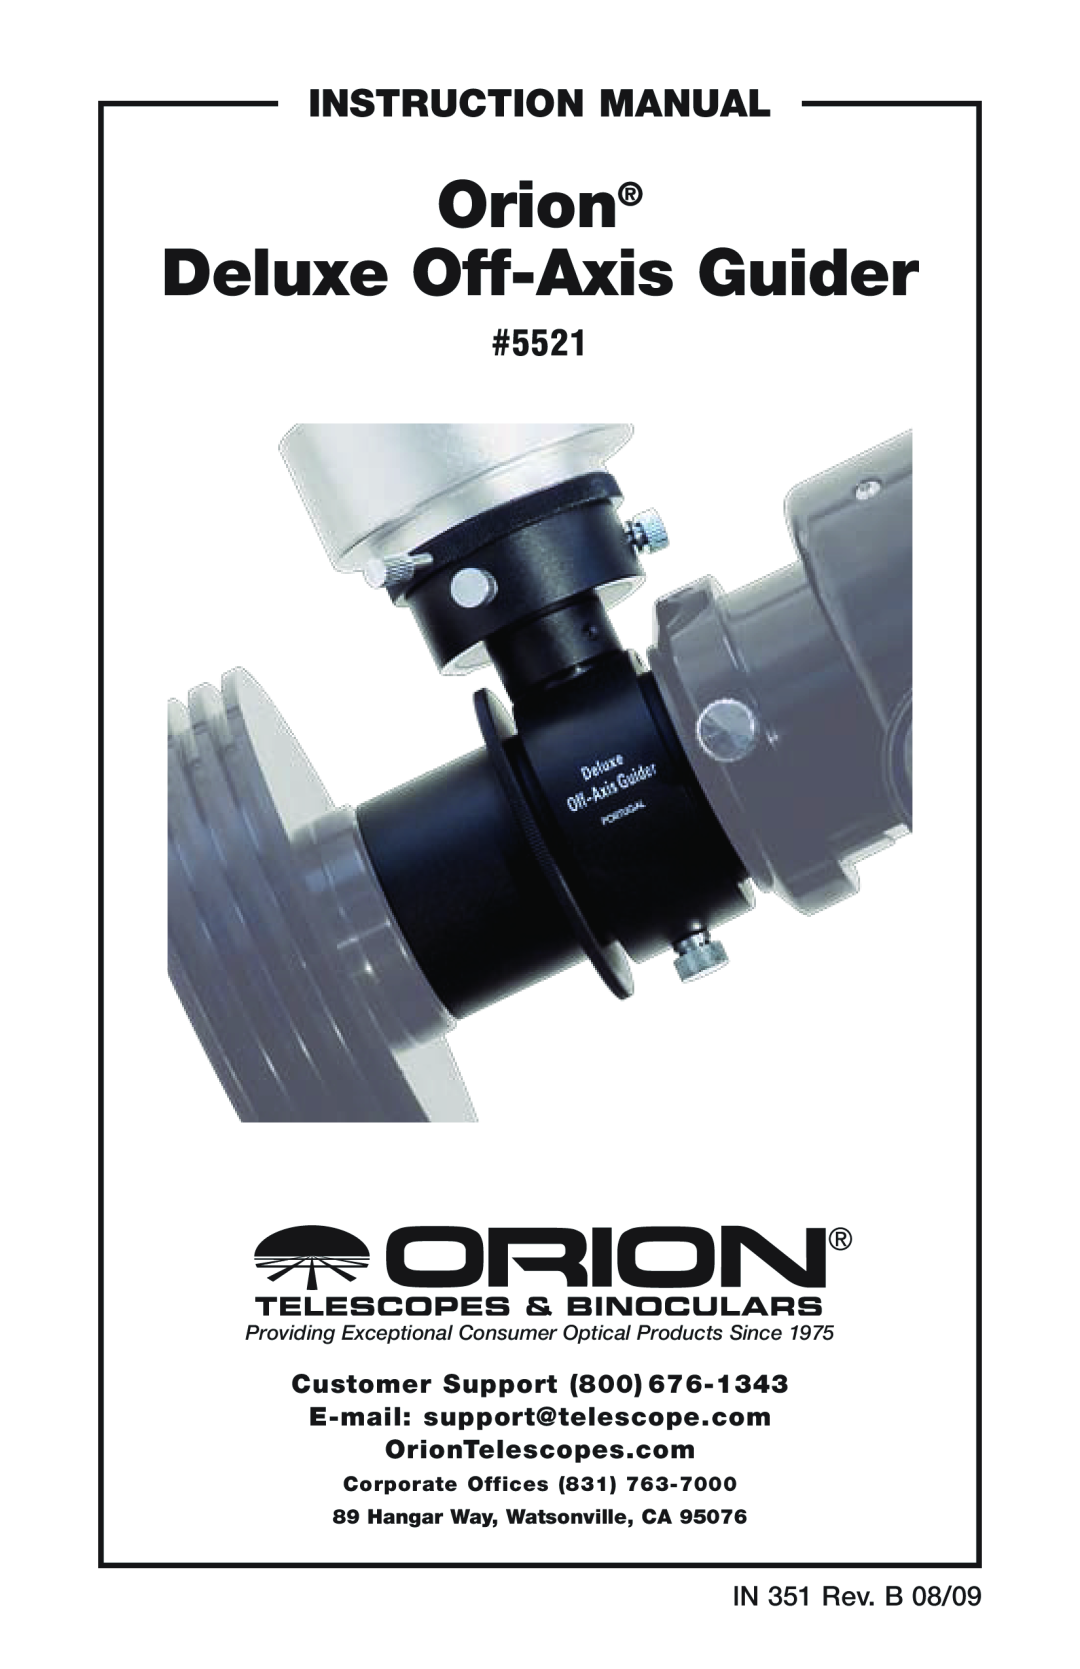 Orion instruction manual Orion Deluxe Off-AxisGuider, #5521, IN 351 Rev. B 08/09, Corporate Offices 